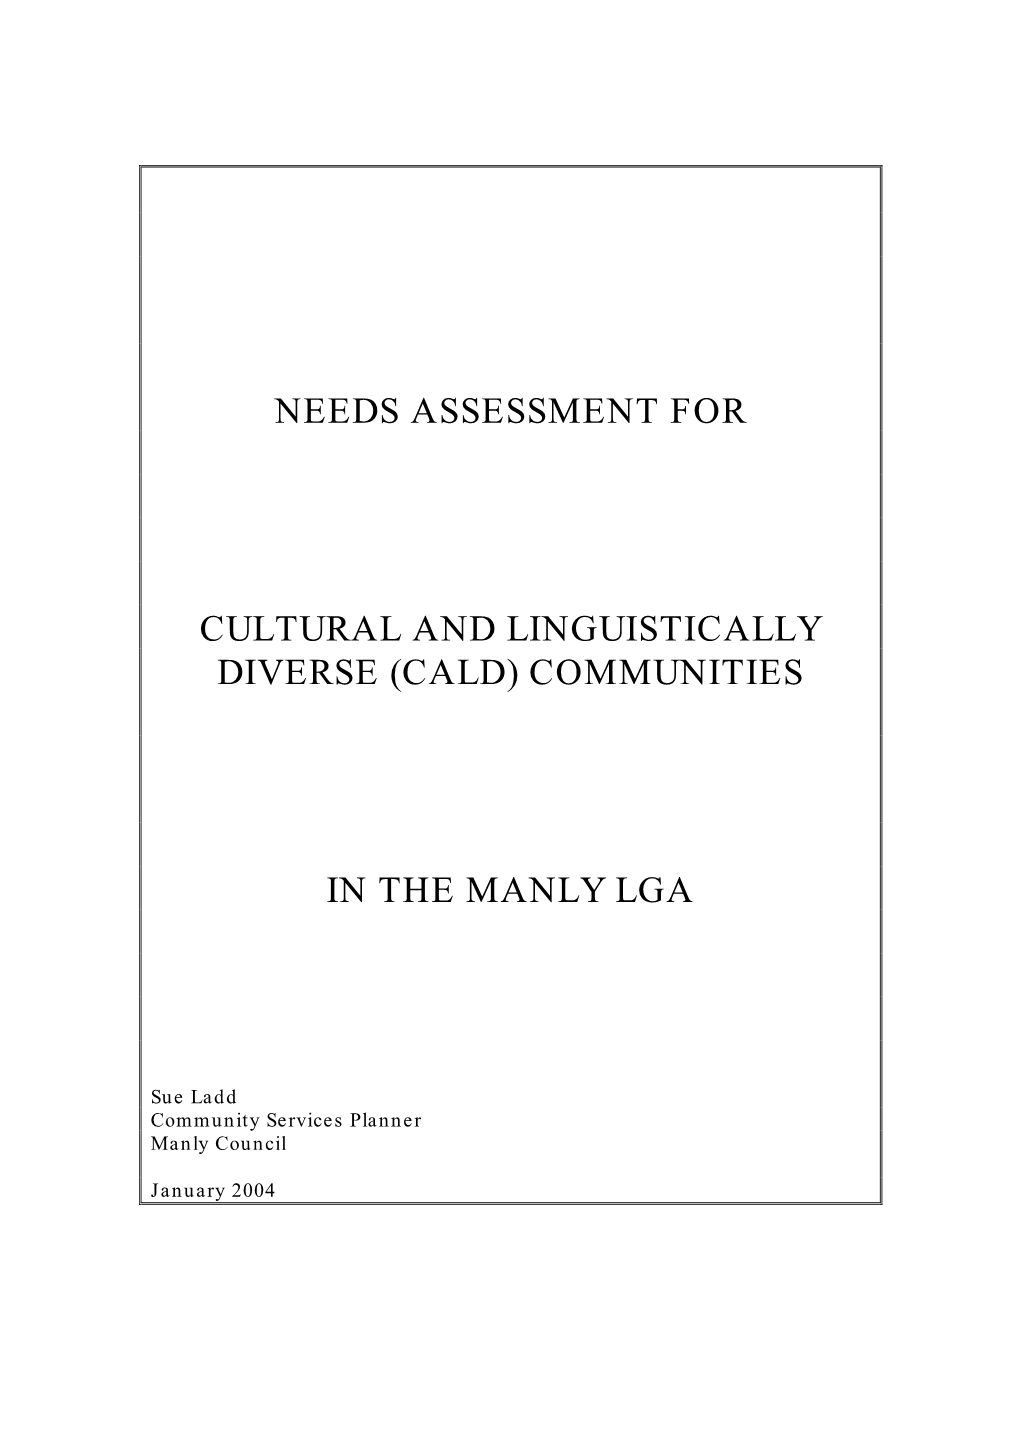 Needs Assessment for Cultural and Linguistically Diverse (Cald)